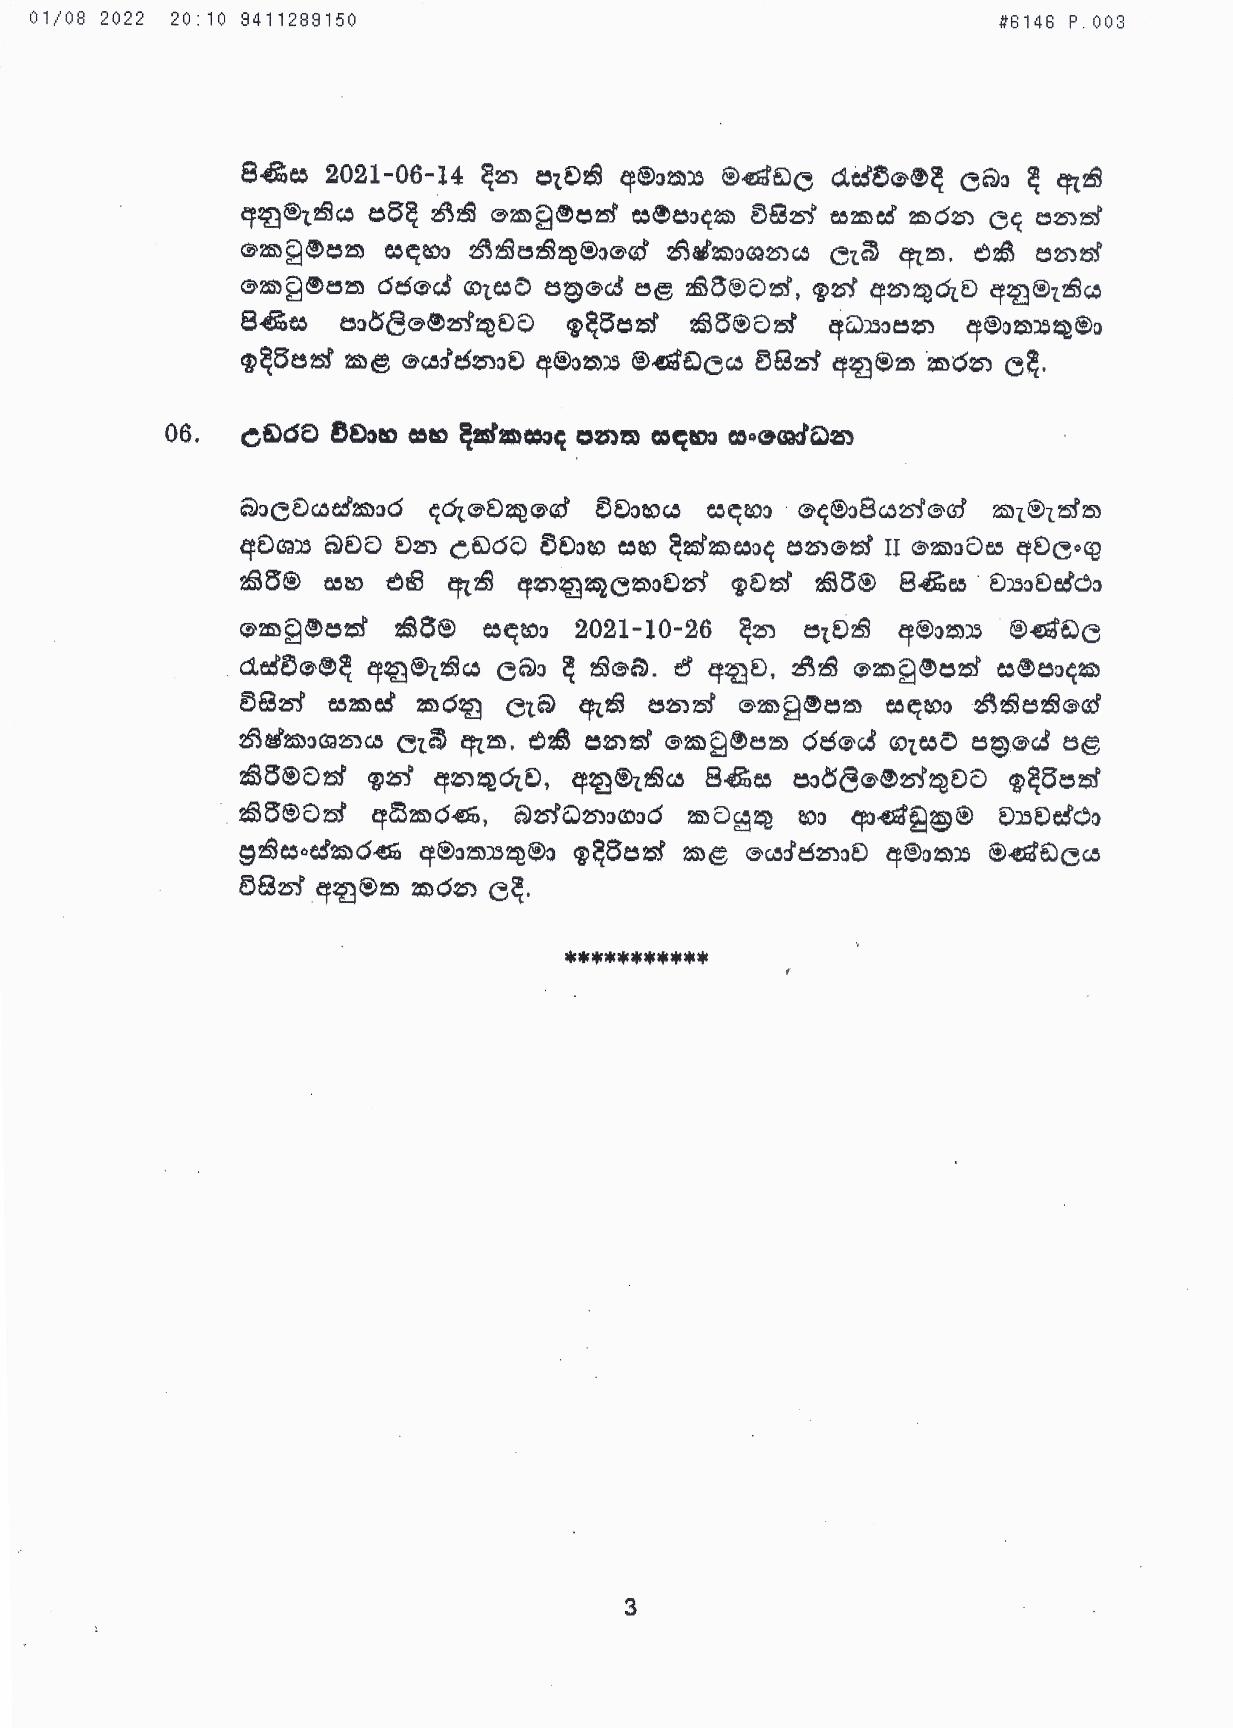 Cabinet Decisions on 01.08.2022 page 003